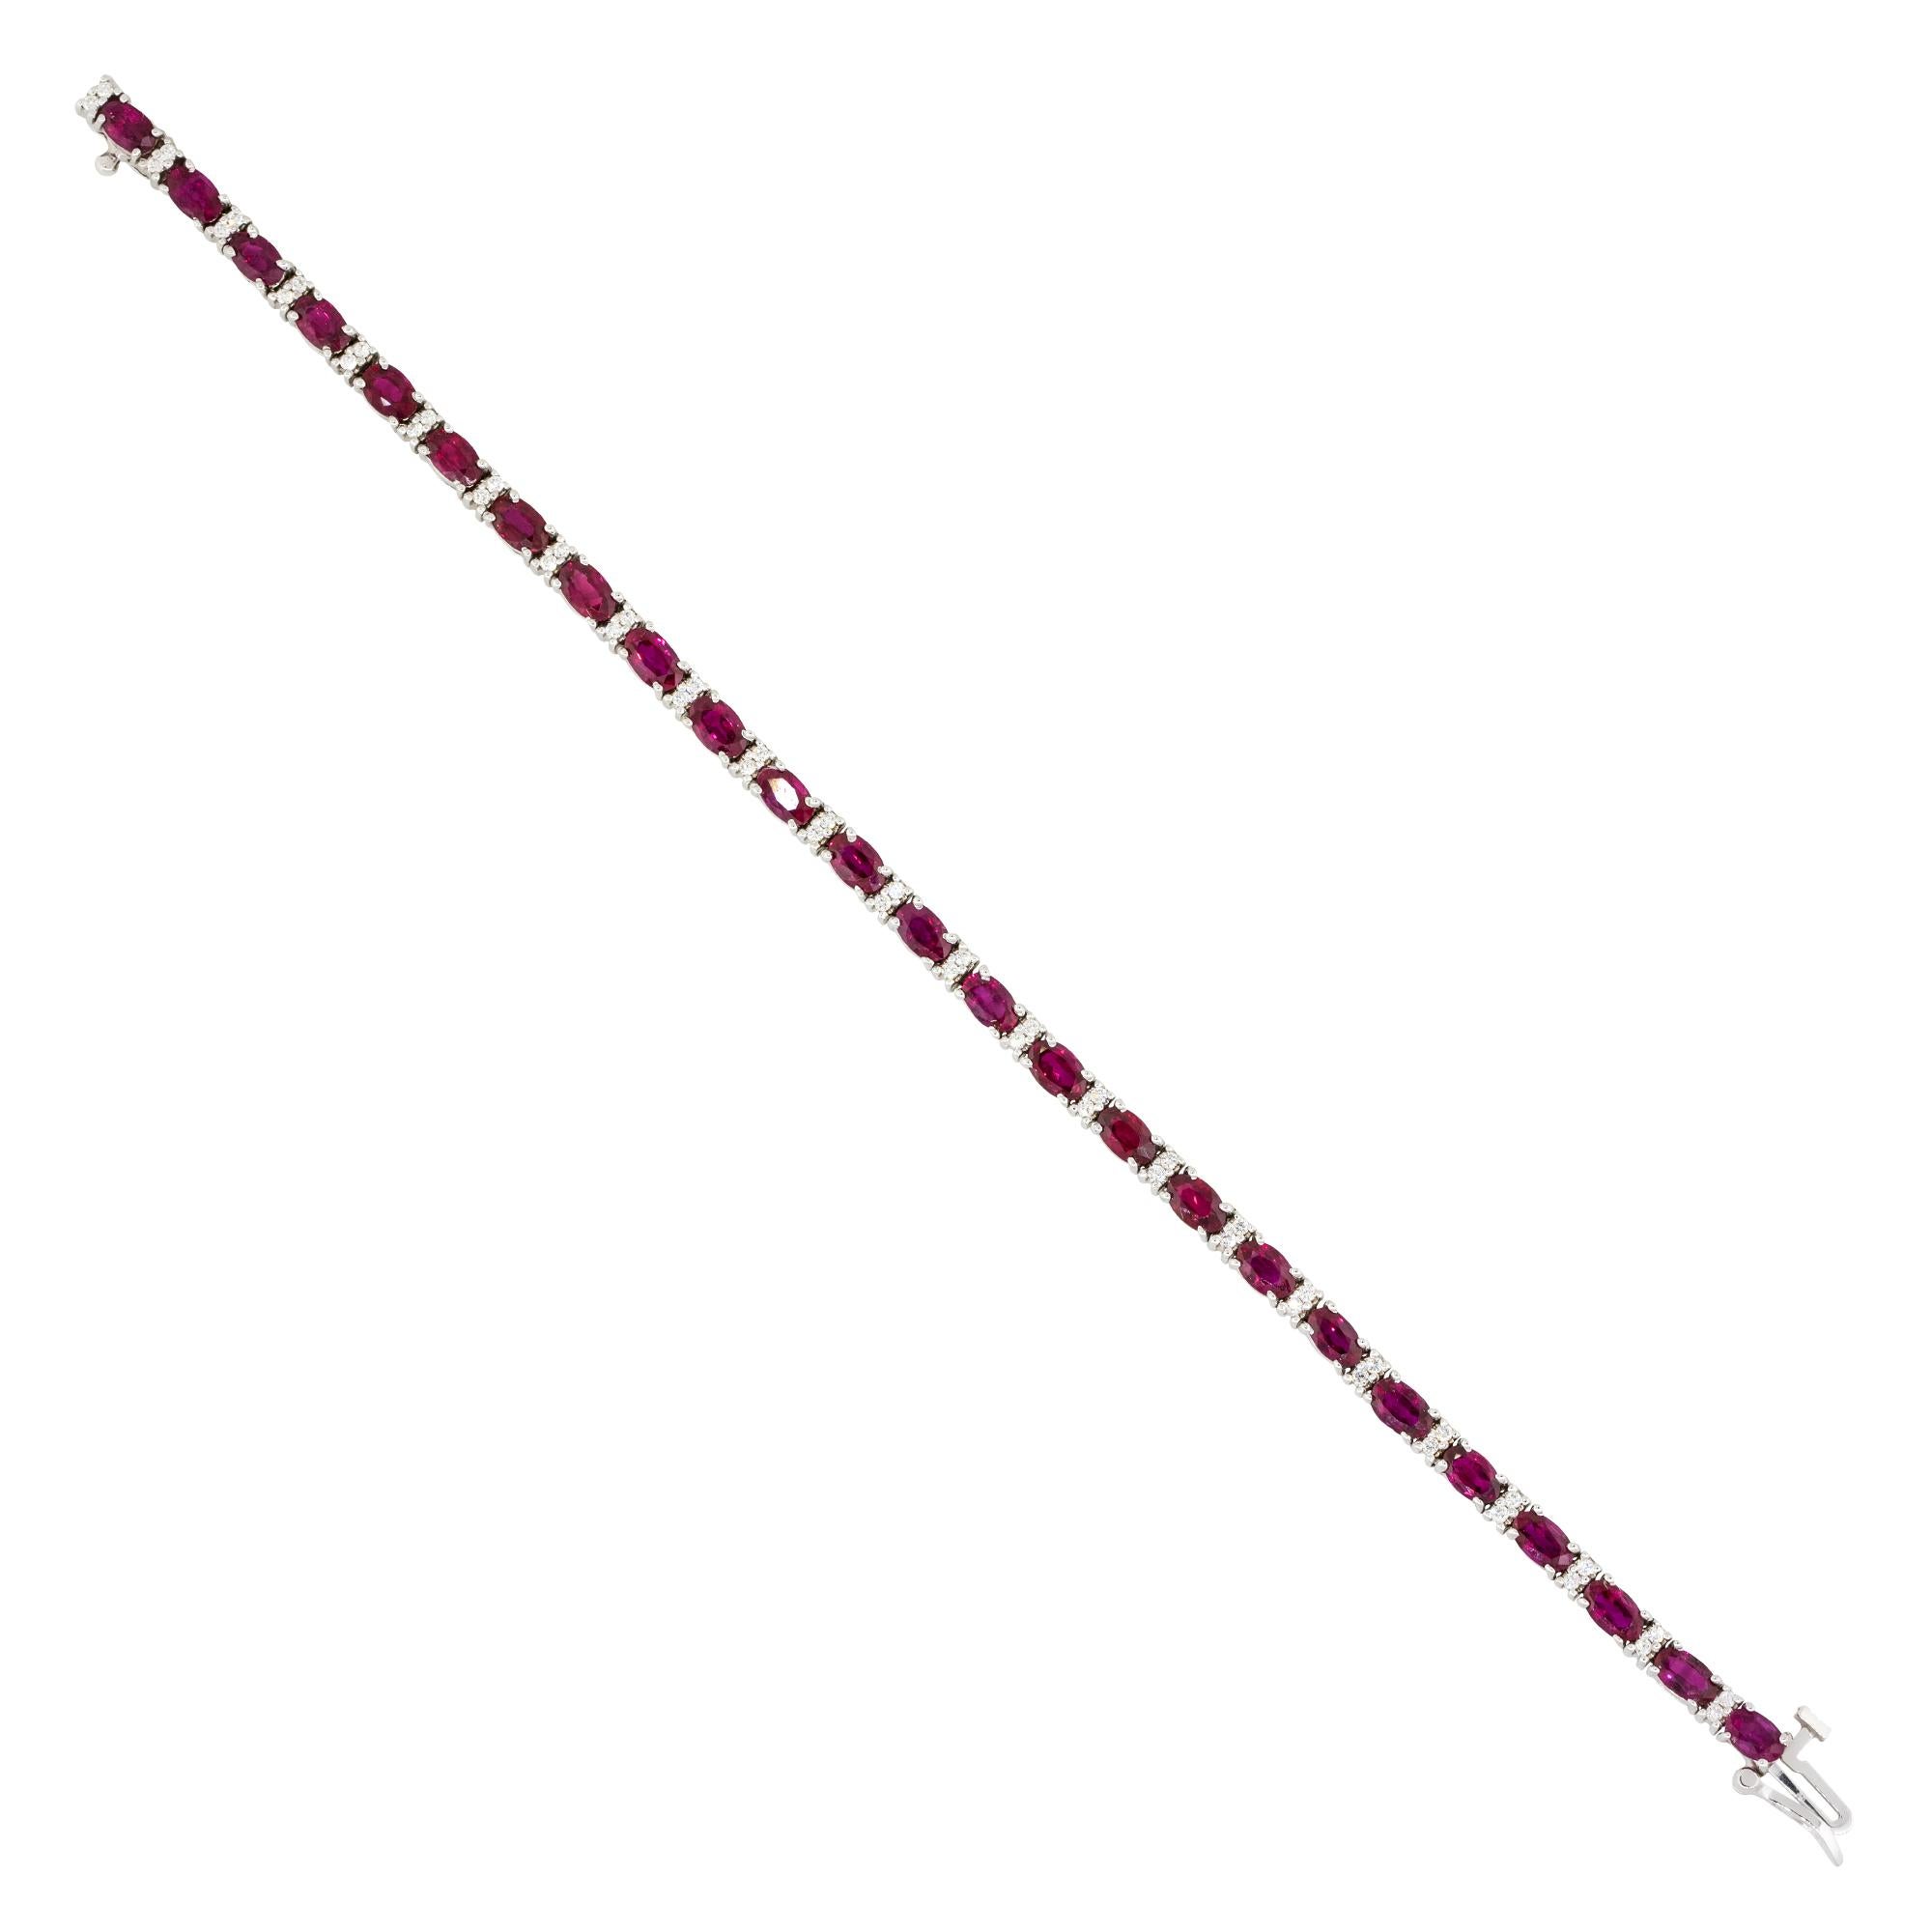 Material: 18k White Gold
Diamond Details: Approx. 0.55ctw of round cut Diamonds. Diamonds are G/H in color and VS in clarity
Gemstone Details: Approx. 8.05ctw of oval cut Ruby gemstones
Clasps: Tongue in box clasp with safety latch
Total Weight: 15g